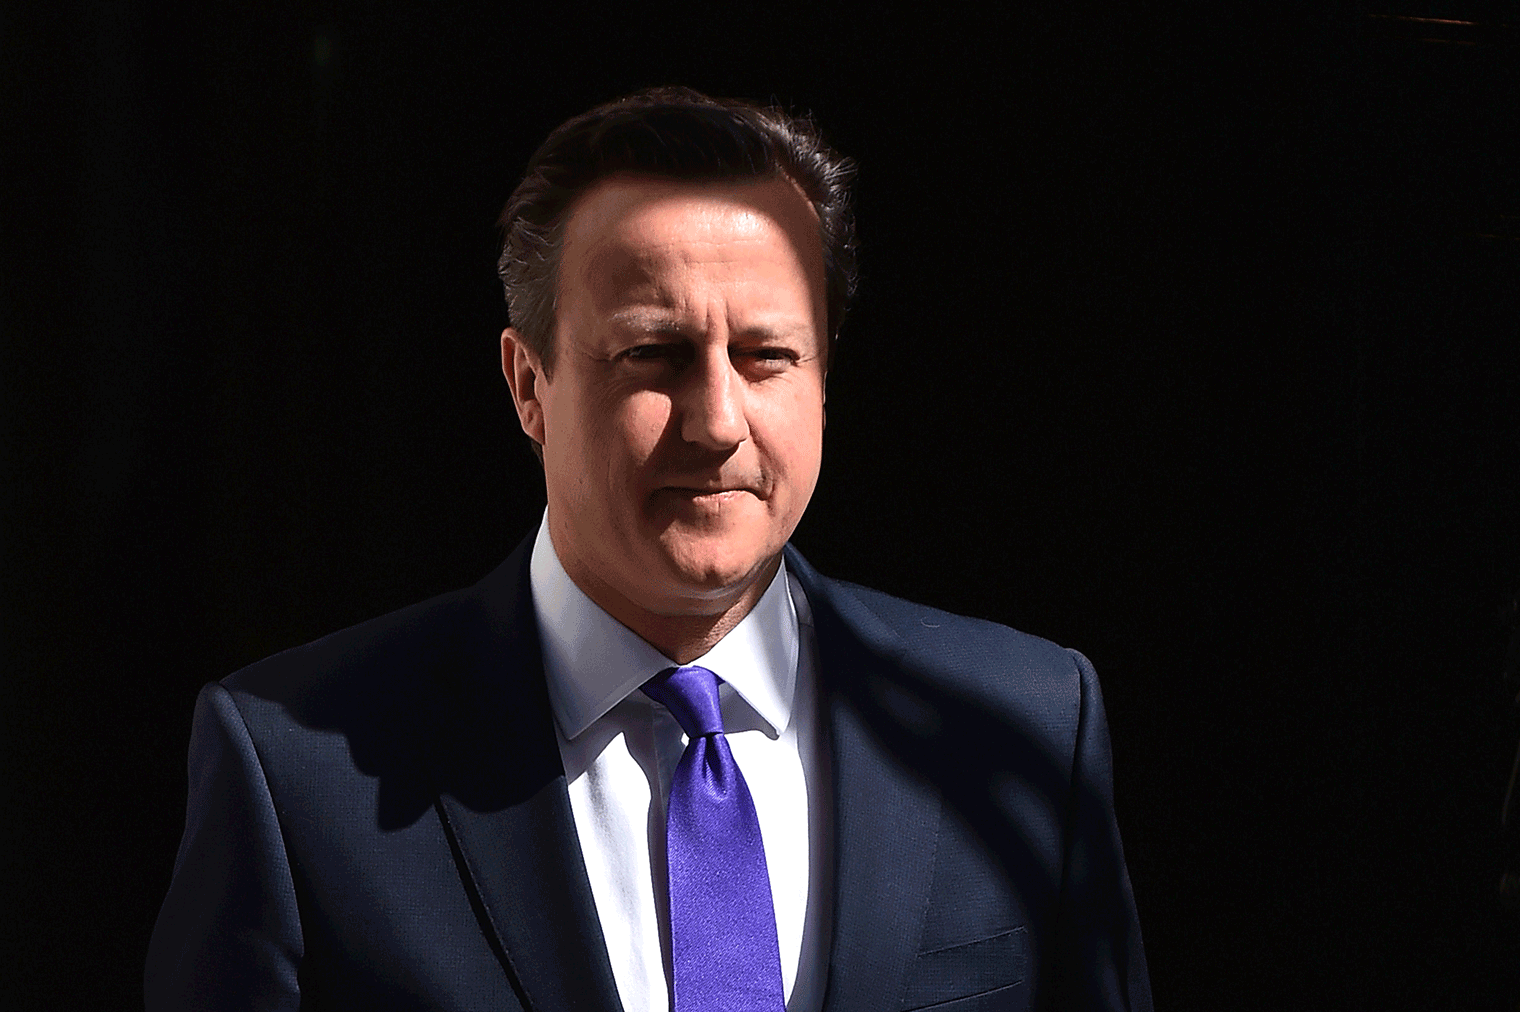 This is the creepiest thing David Cameron has ever said